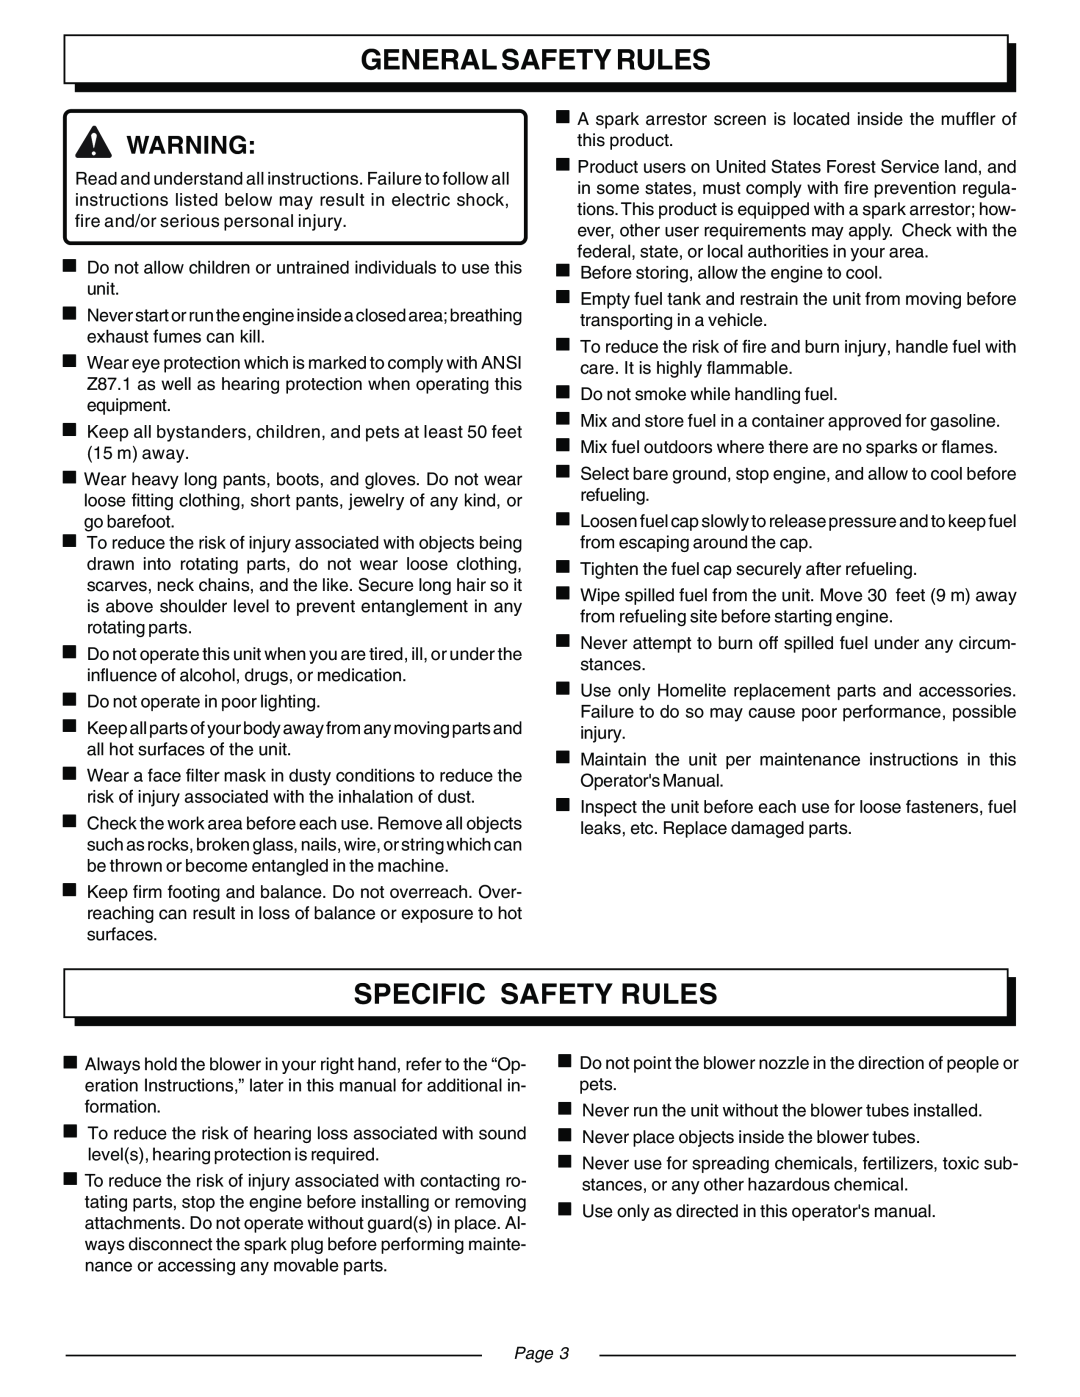 Homelite UT08511, UT08510 manual General Safety Rules, Specific Safety Rules, Page 